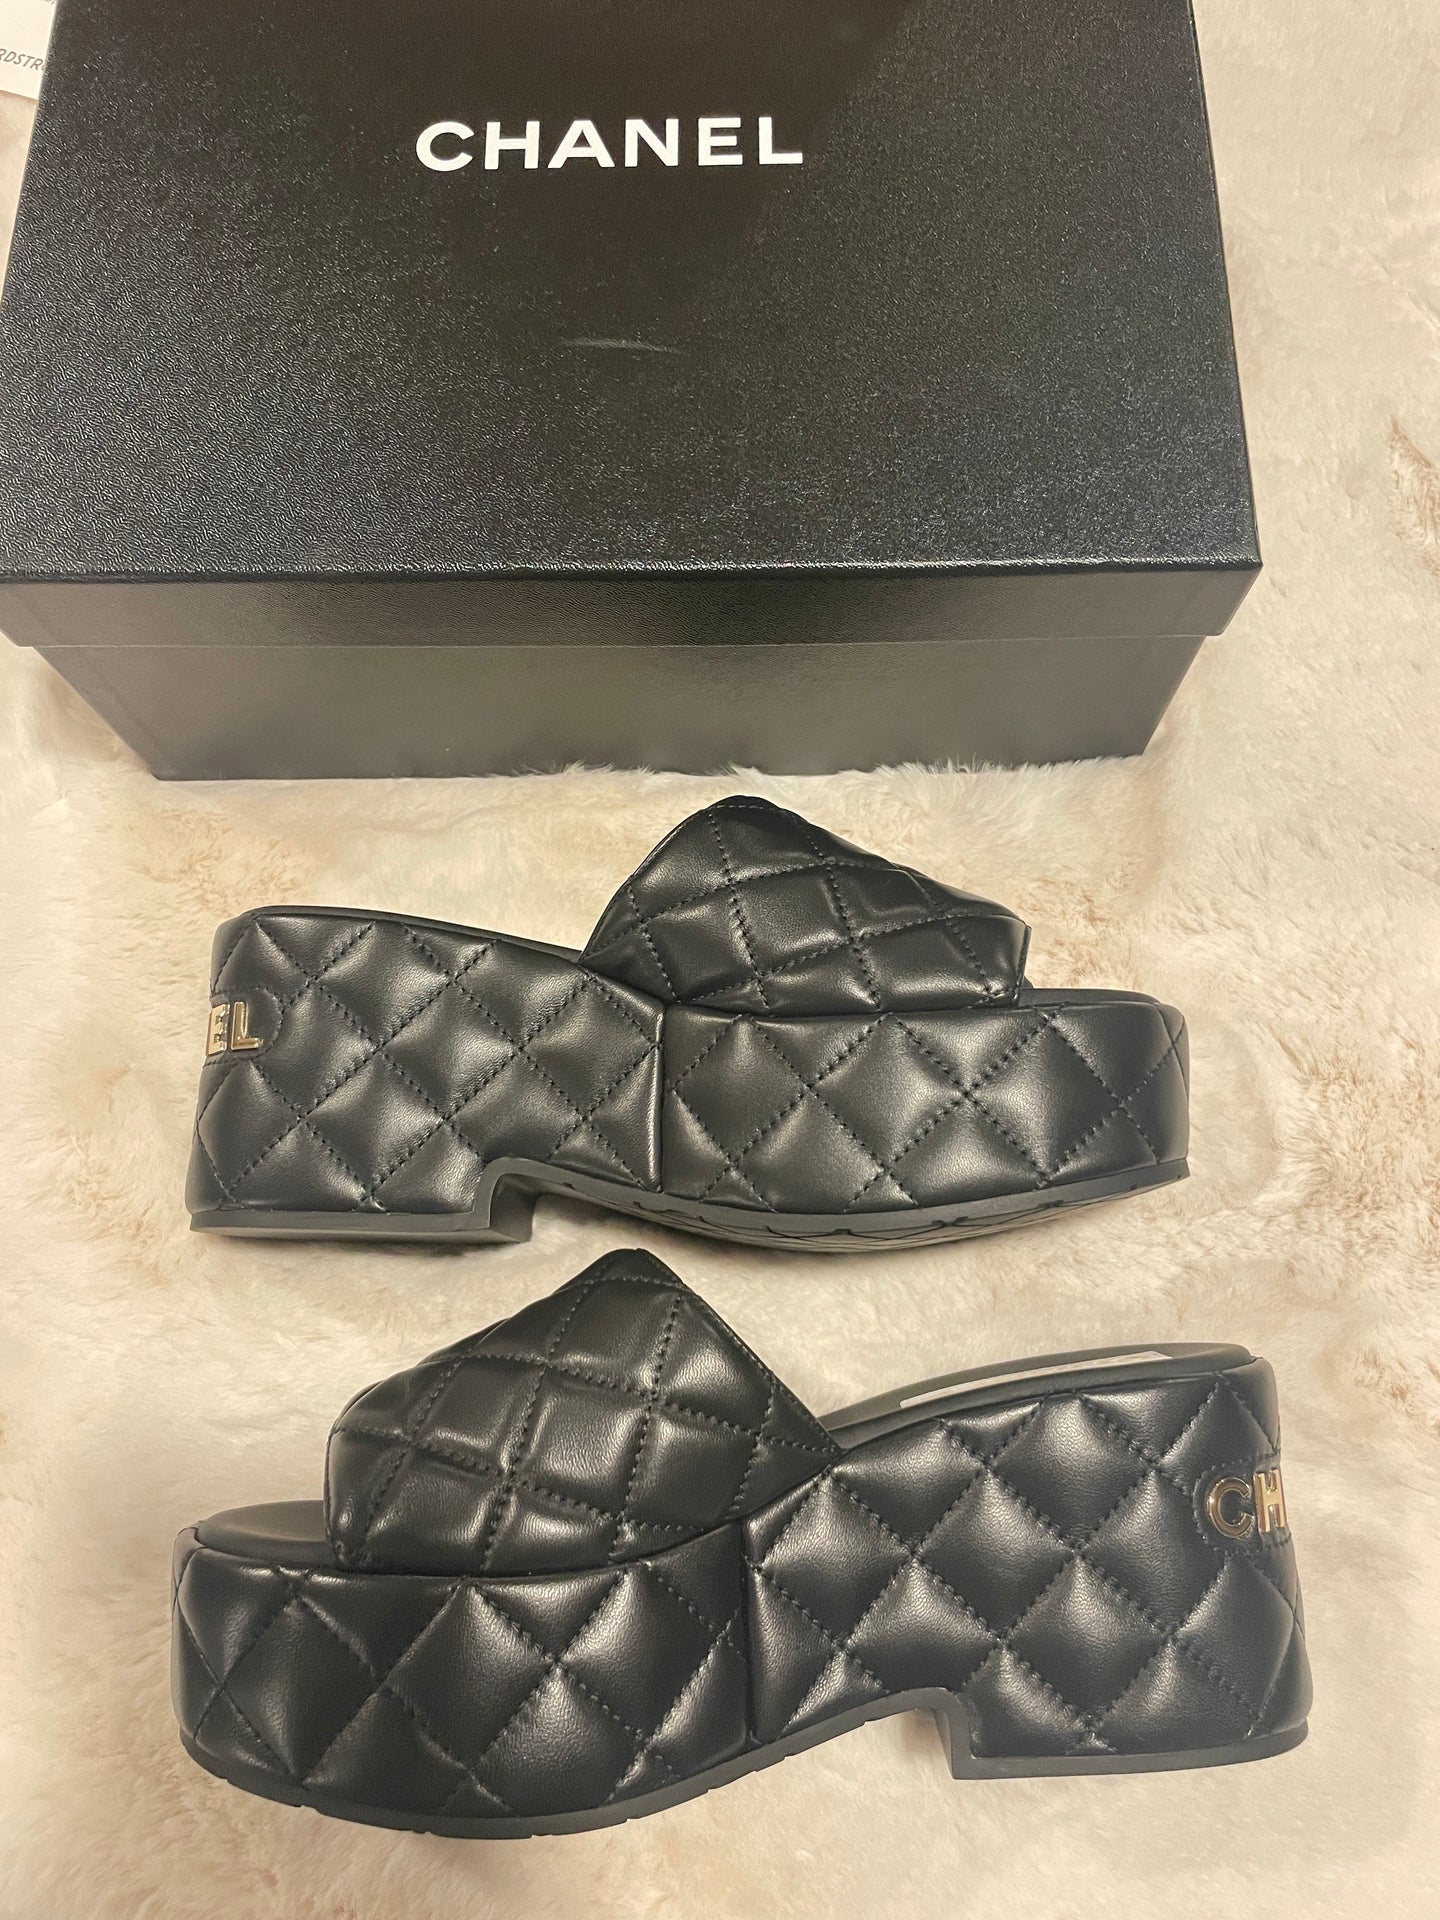 Chanel Black Quilted Leather Mule Sandals